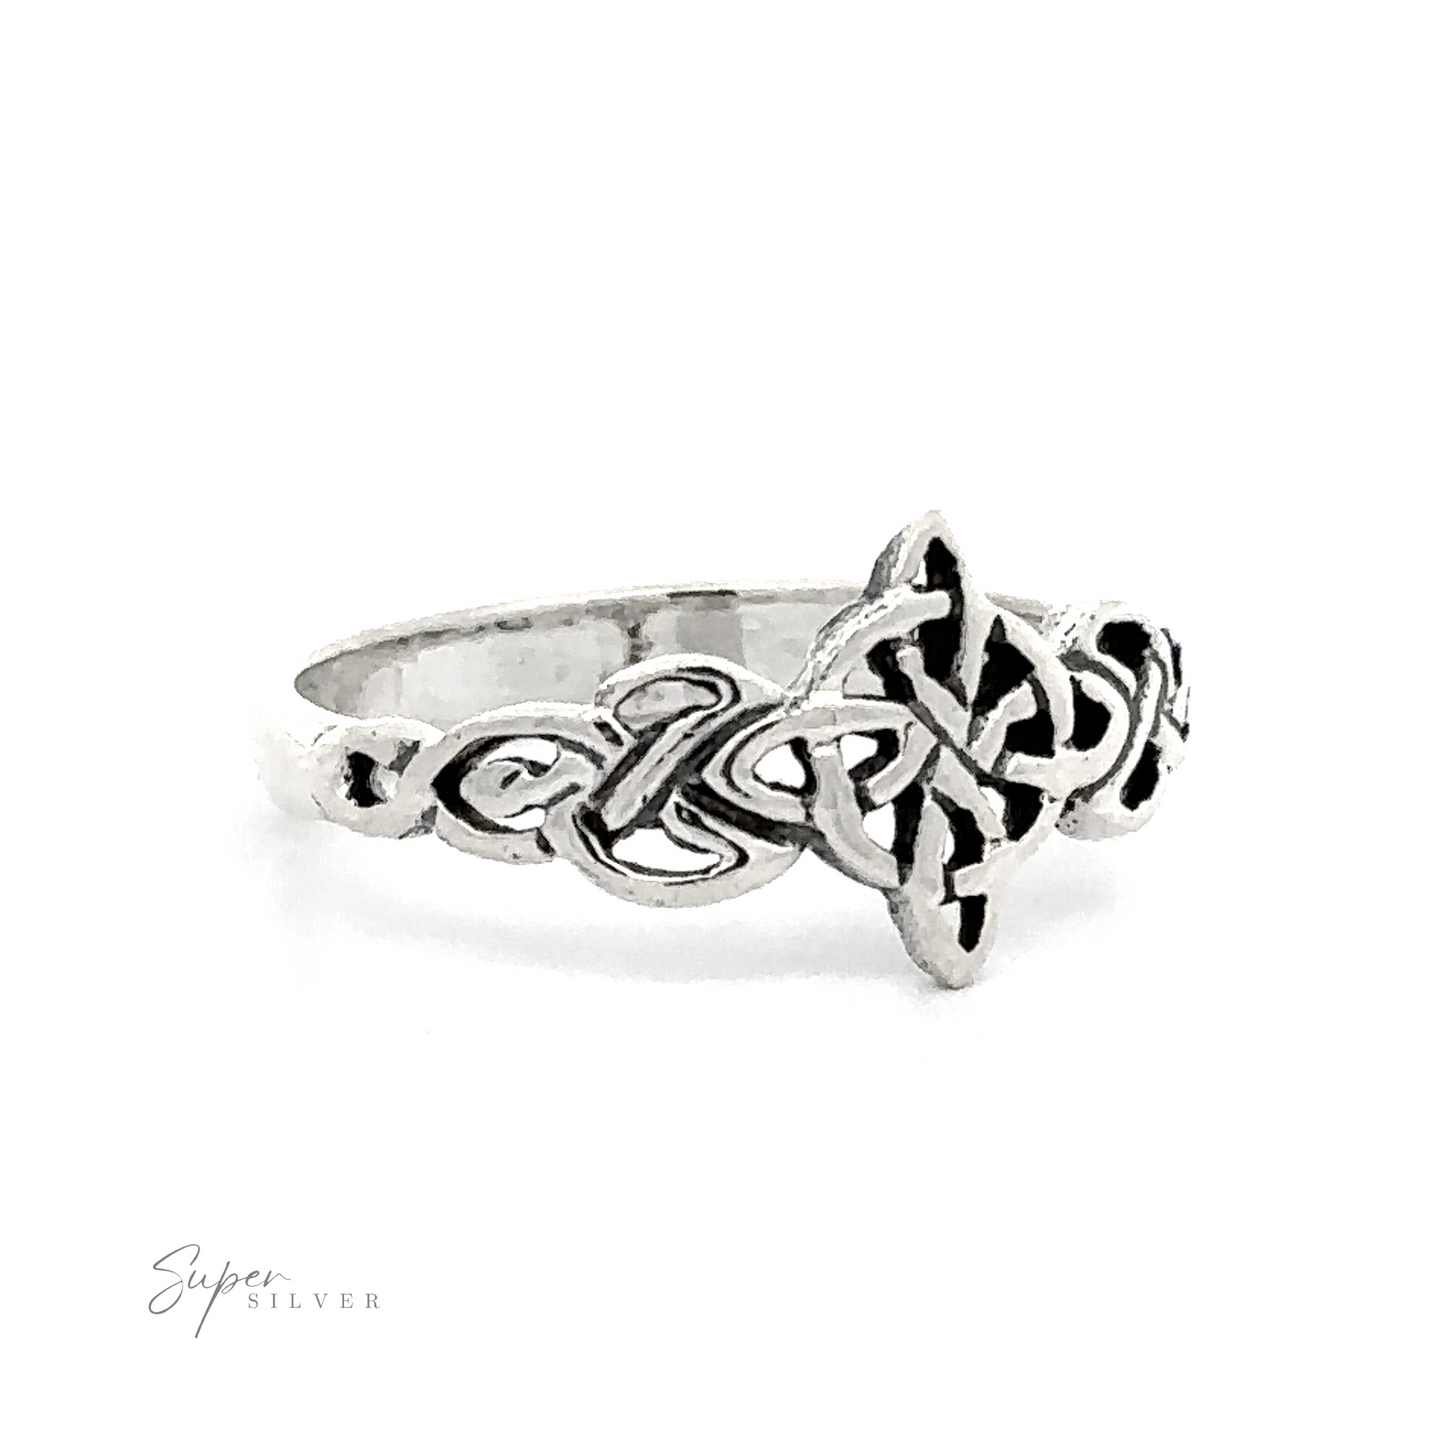 Four Pointed Celtic Knot ring showcasing timeless beauty in sterling silver.